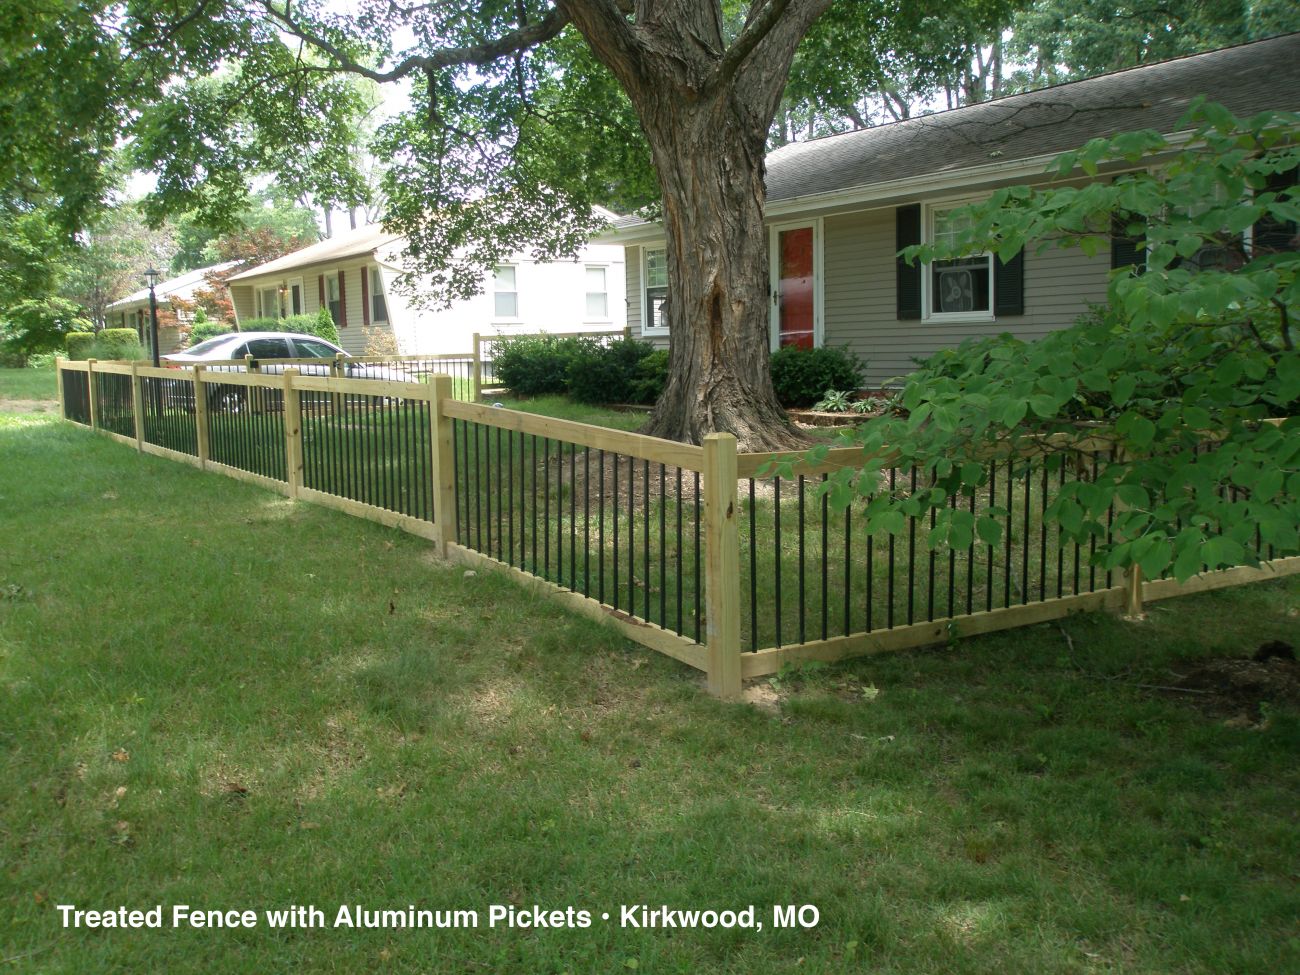 Treated Fence with Aluminum Pickets